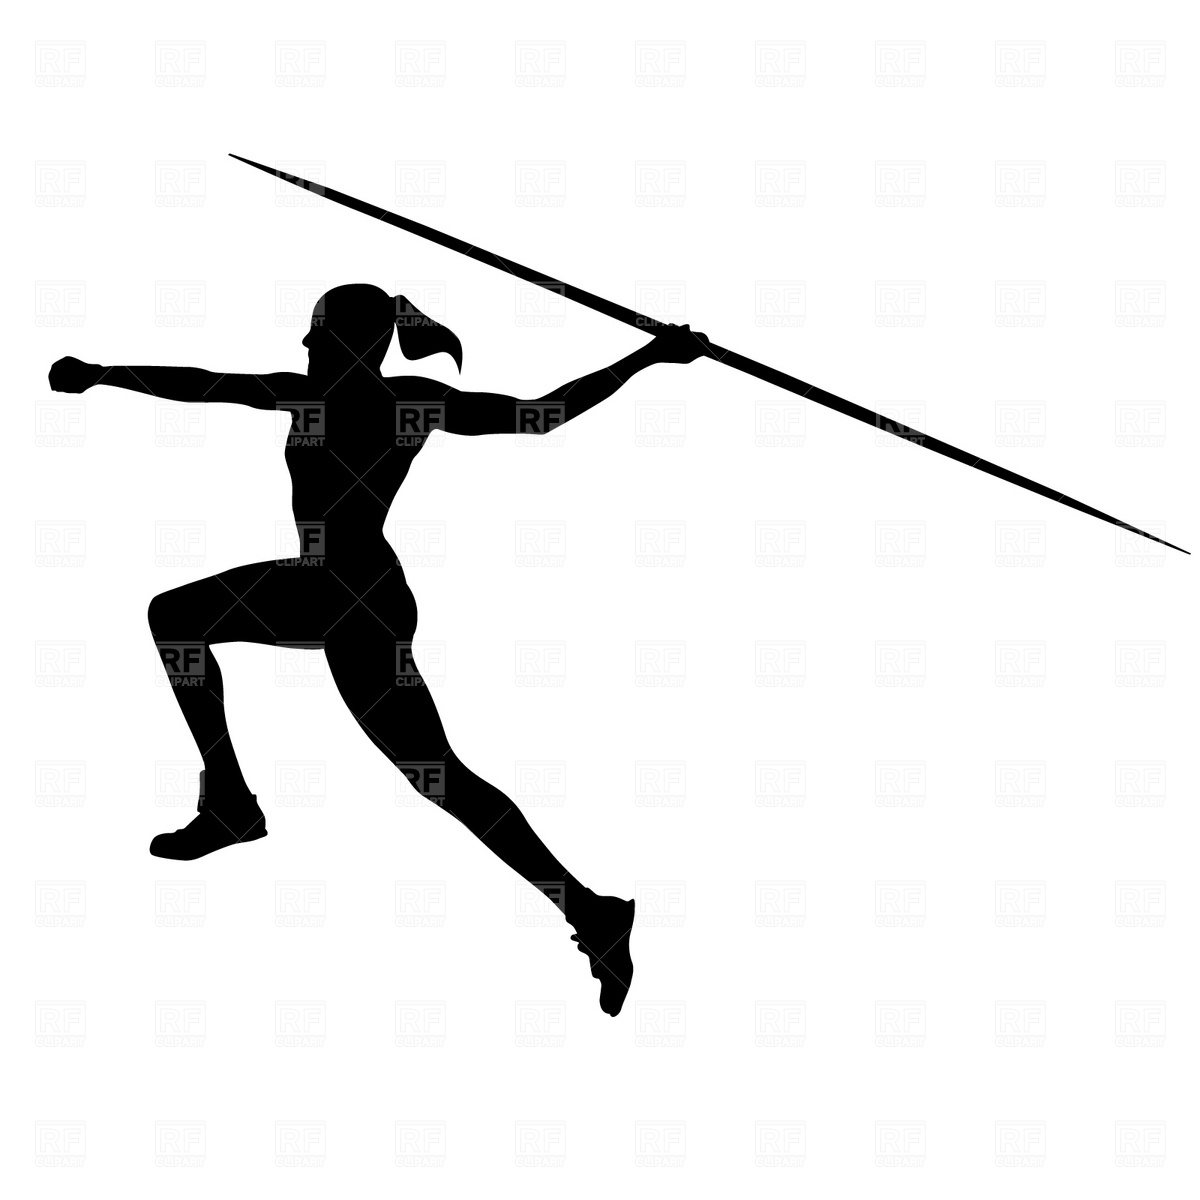 Women S Javelin 1770 Silhouettes Outlines Download Royalty Free